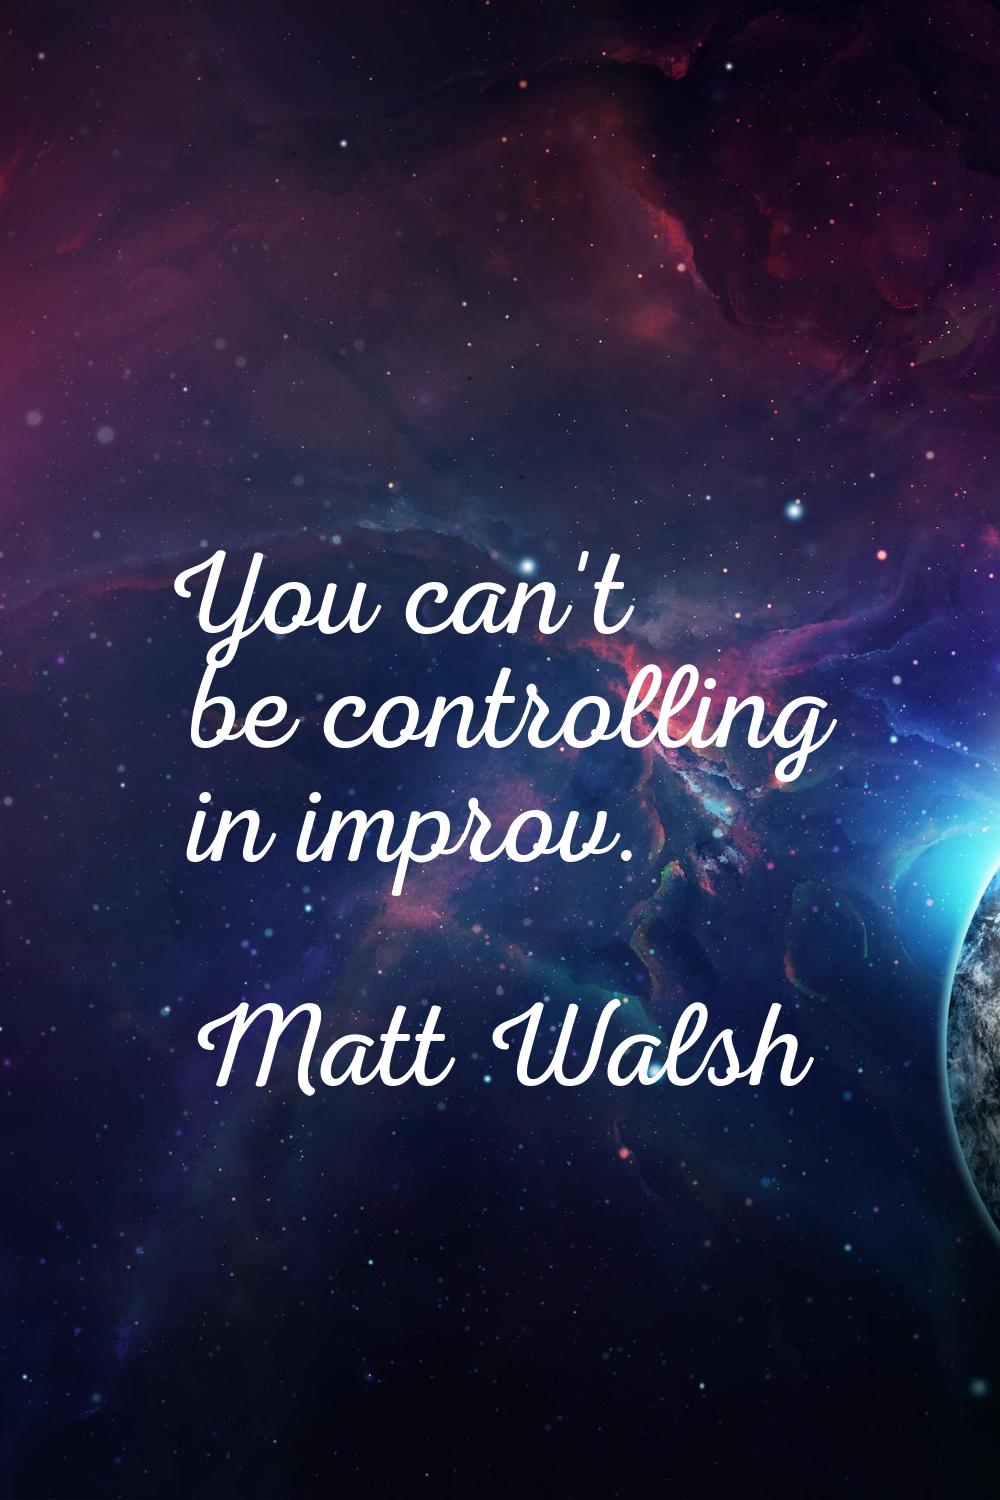 You can't be controlling in improv.